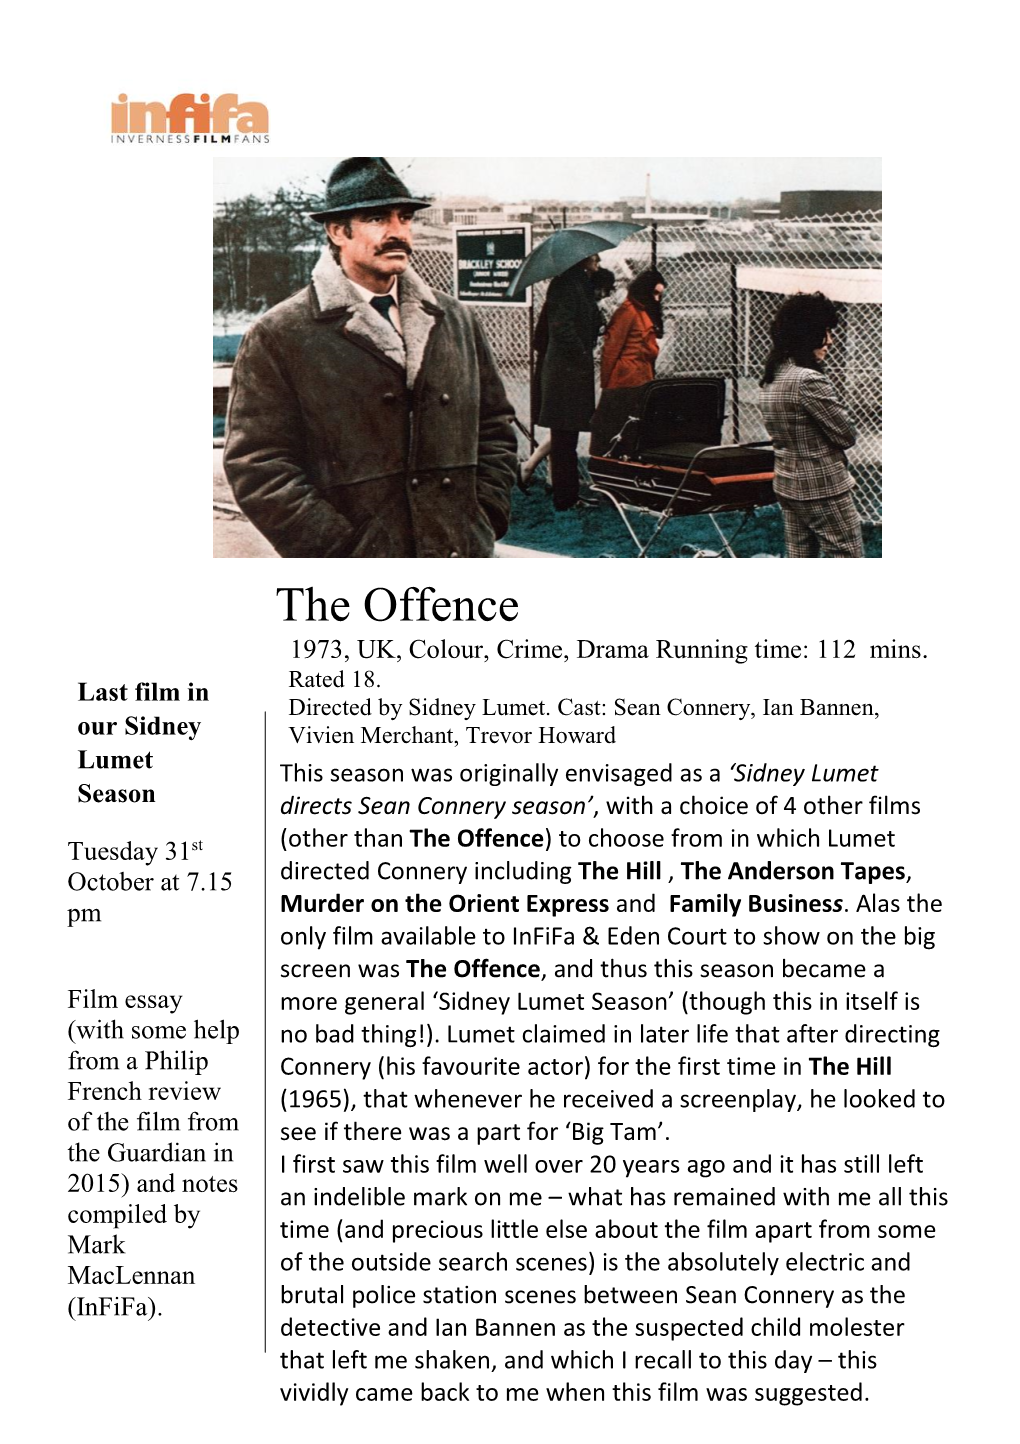 The Offence 1973, UK, Colour, Crime, Drama Running Time: 112 Mins